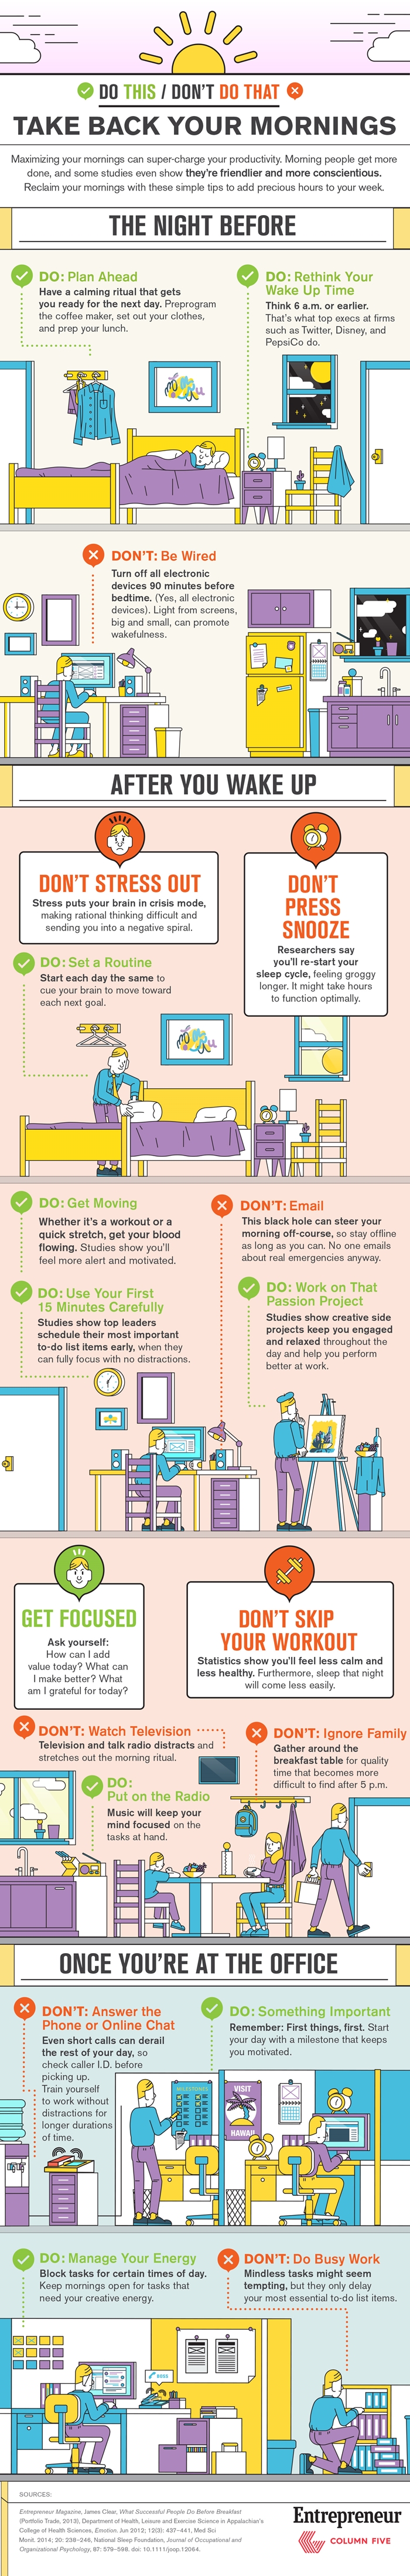 1413563200-take-your-mornings-back-infographic-700